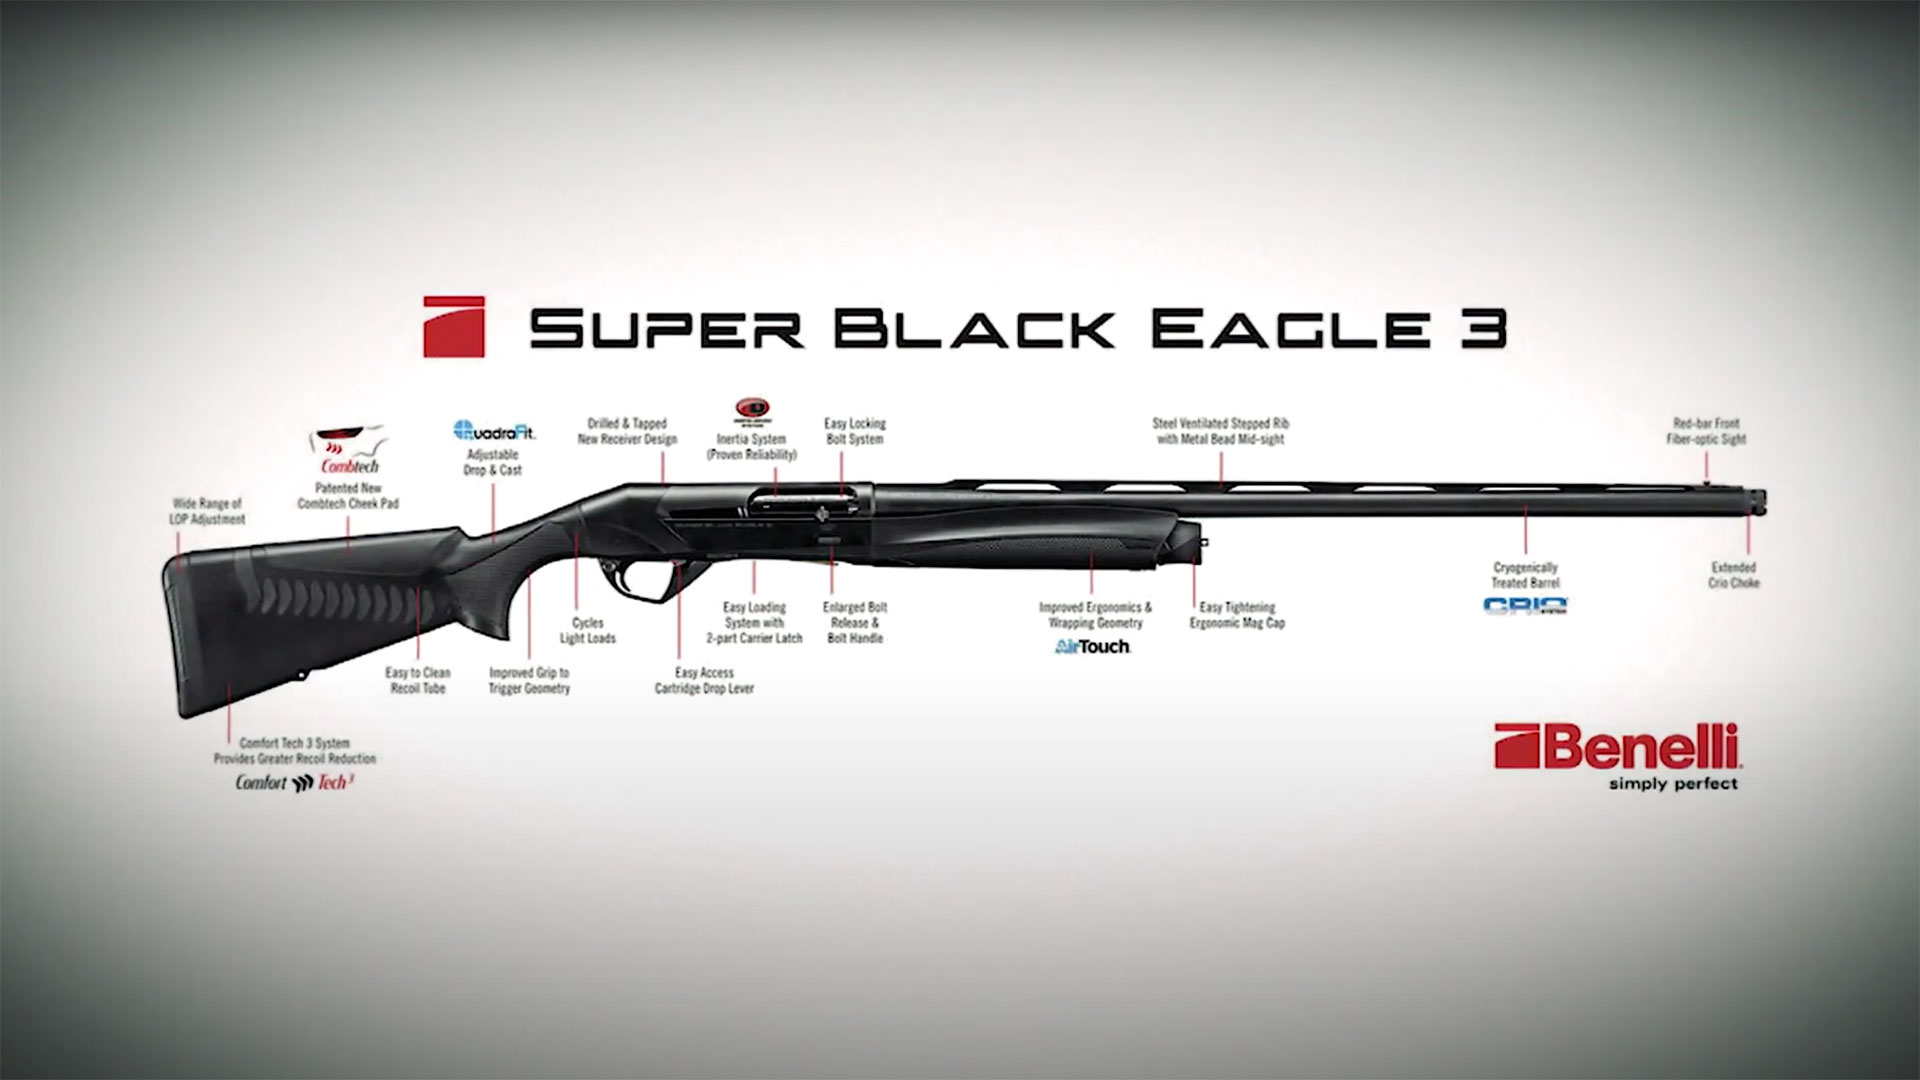 The third iteration of the Super Black Eagle line, the Super Black Eagle 3.